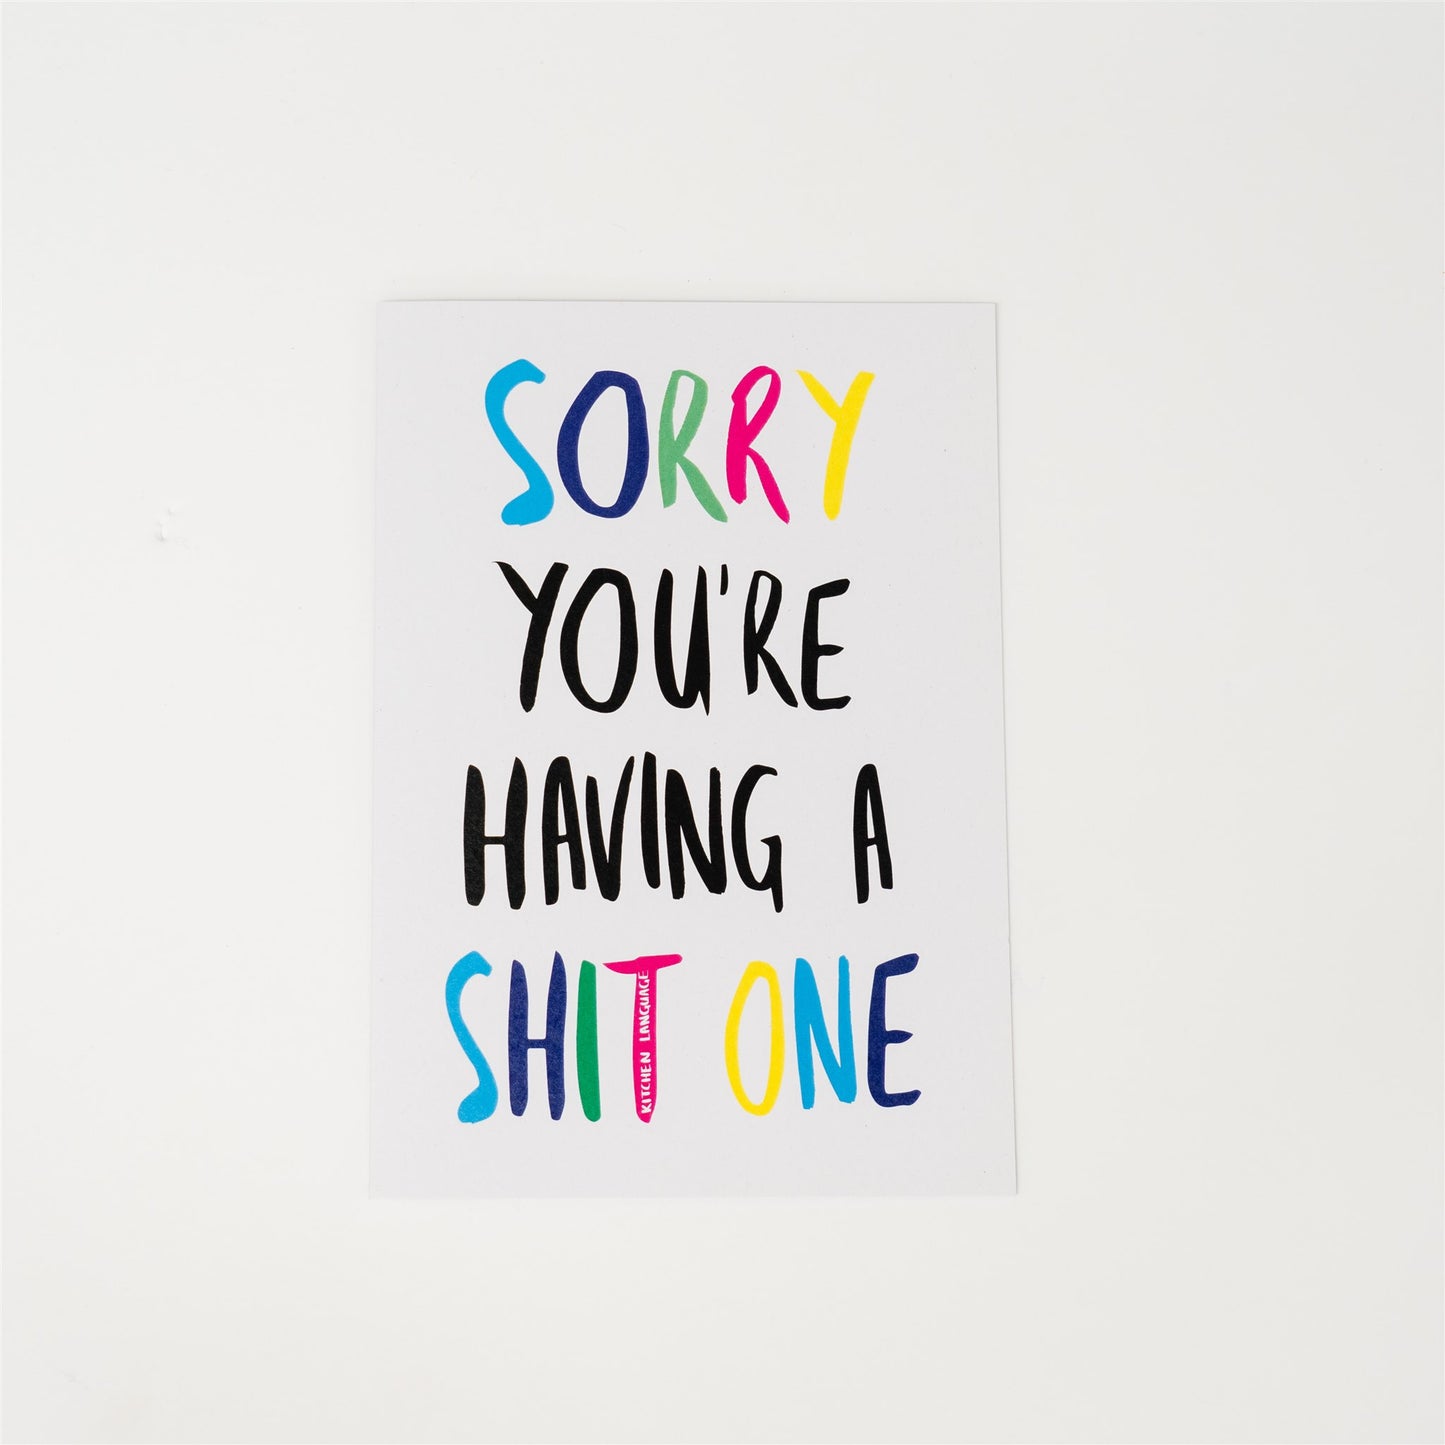 Sorry youre having a shit one- greeting card- kitchen language